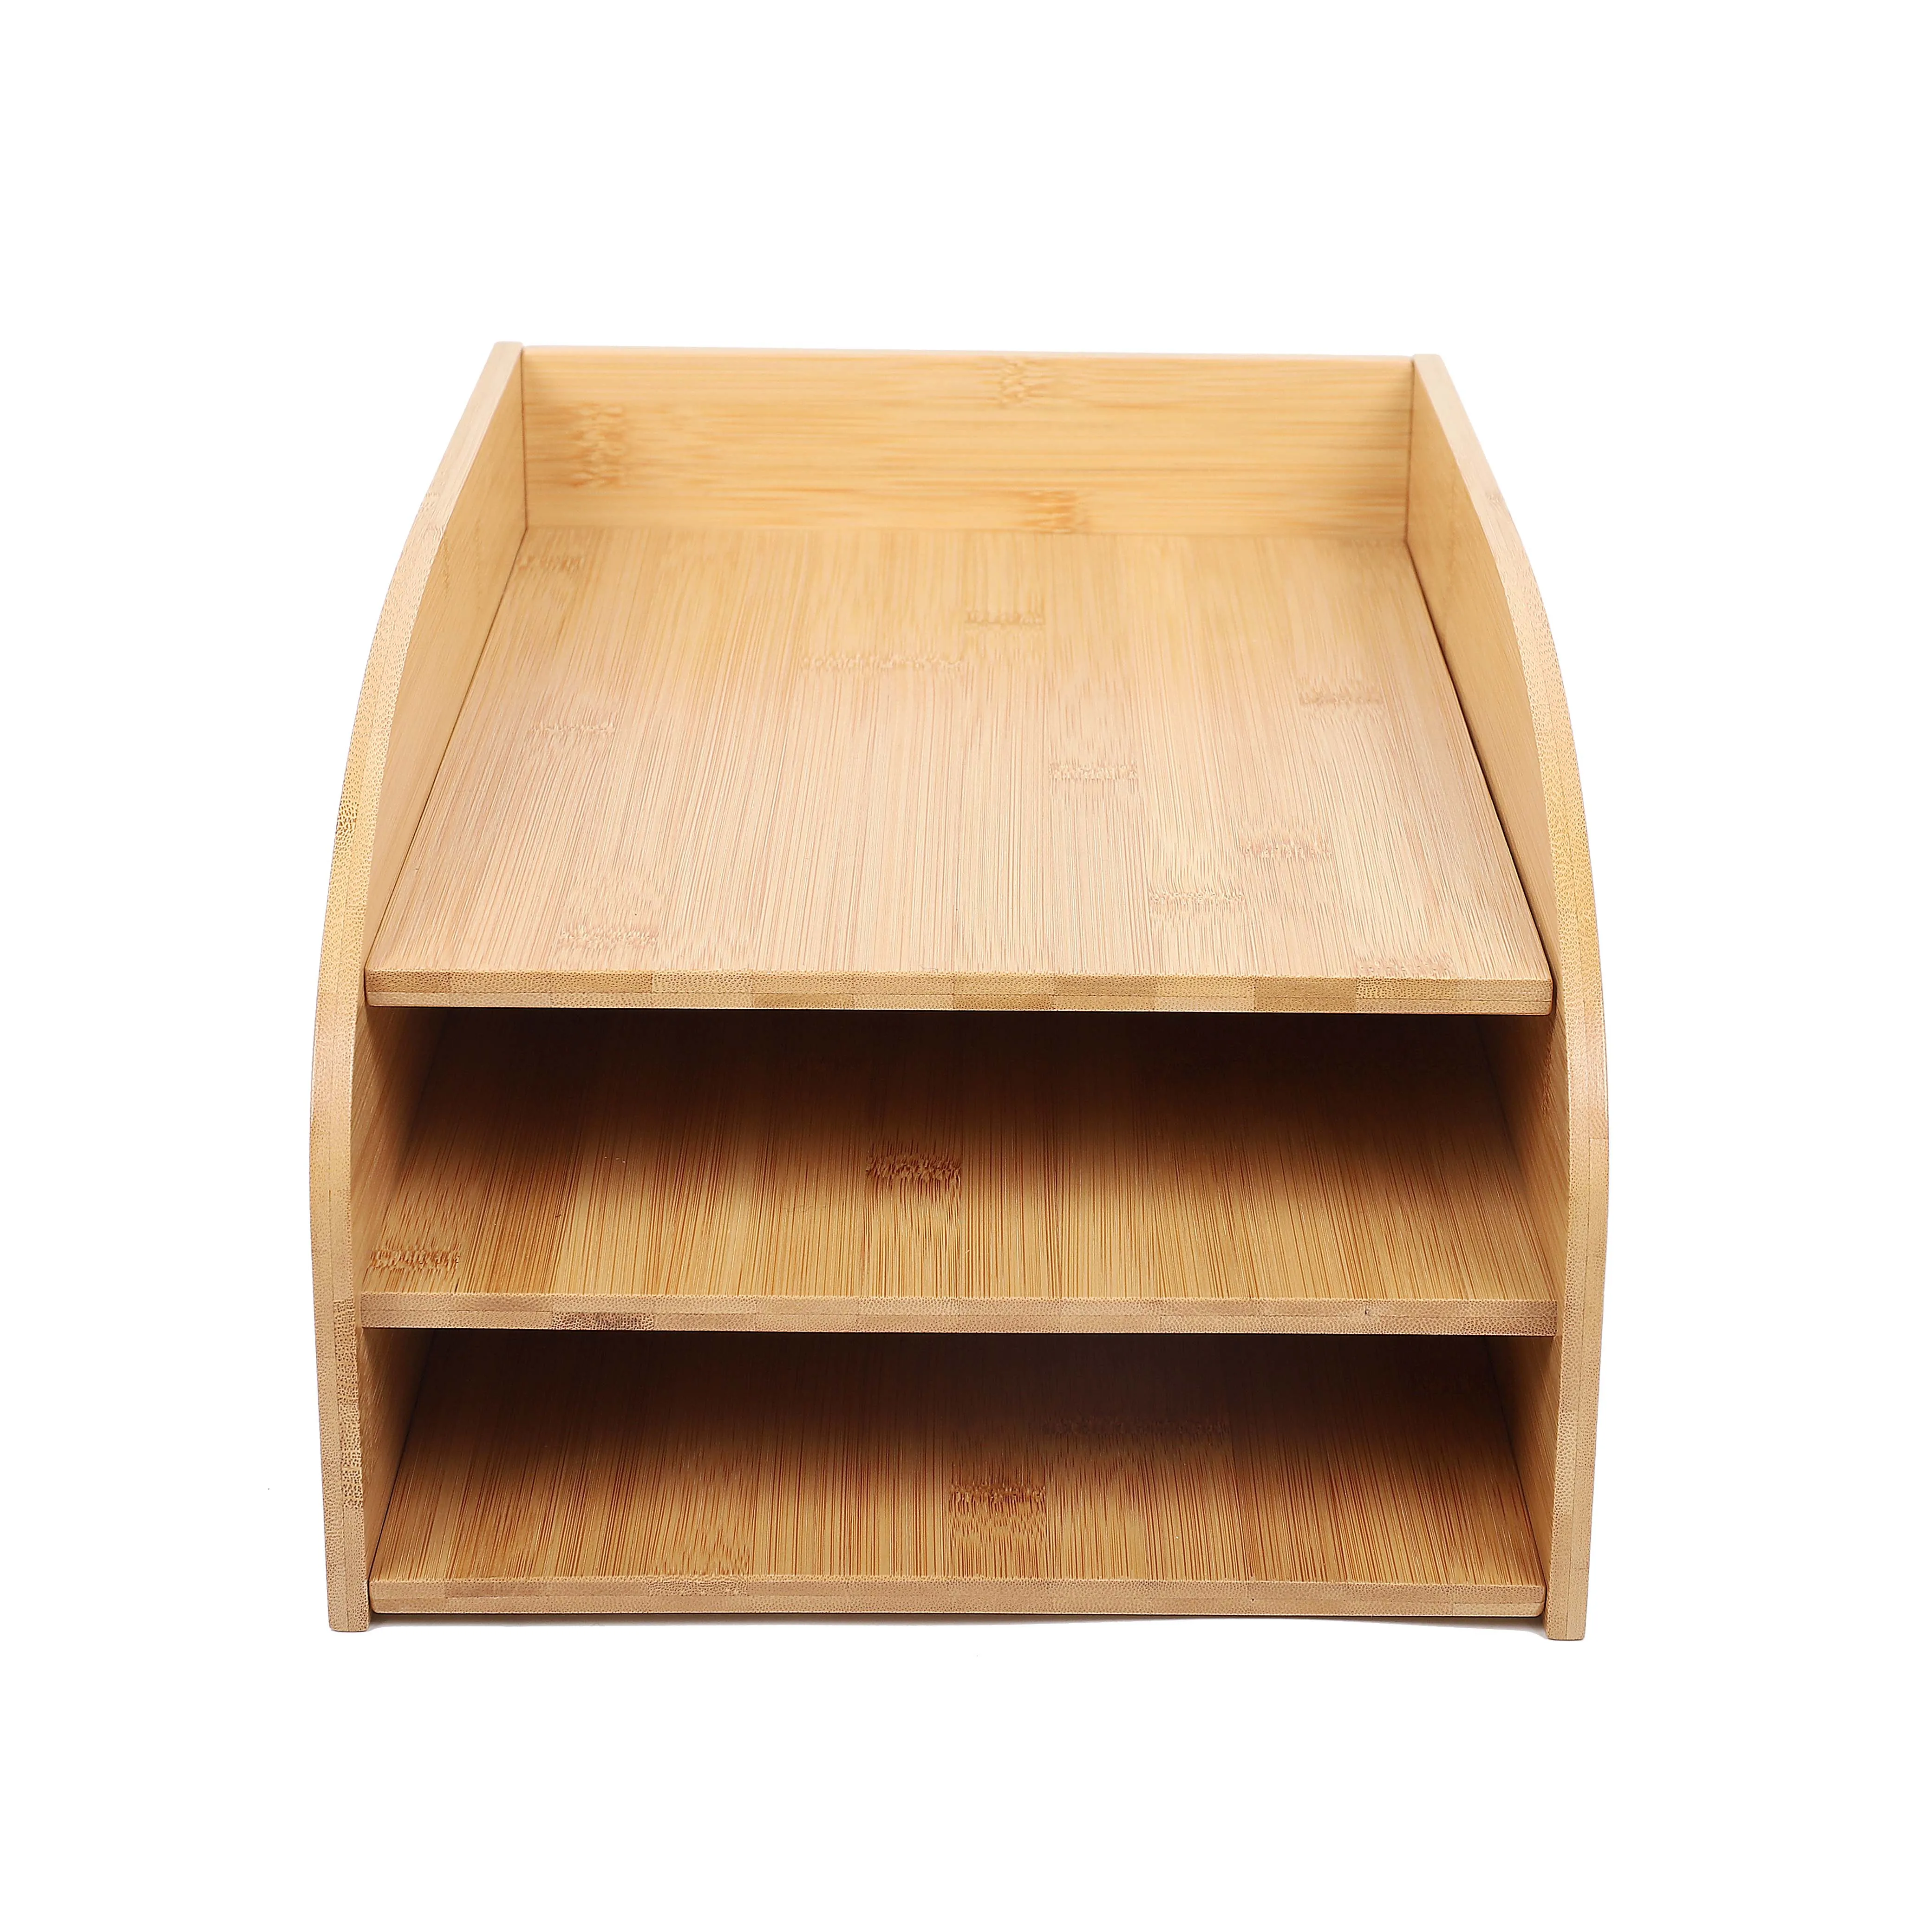 
bamboo A4 paper desk storage organizer with Drawers for Home system letter for table office desk 